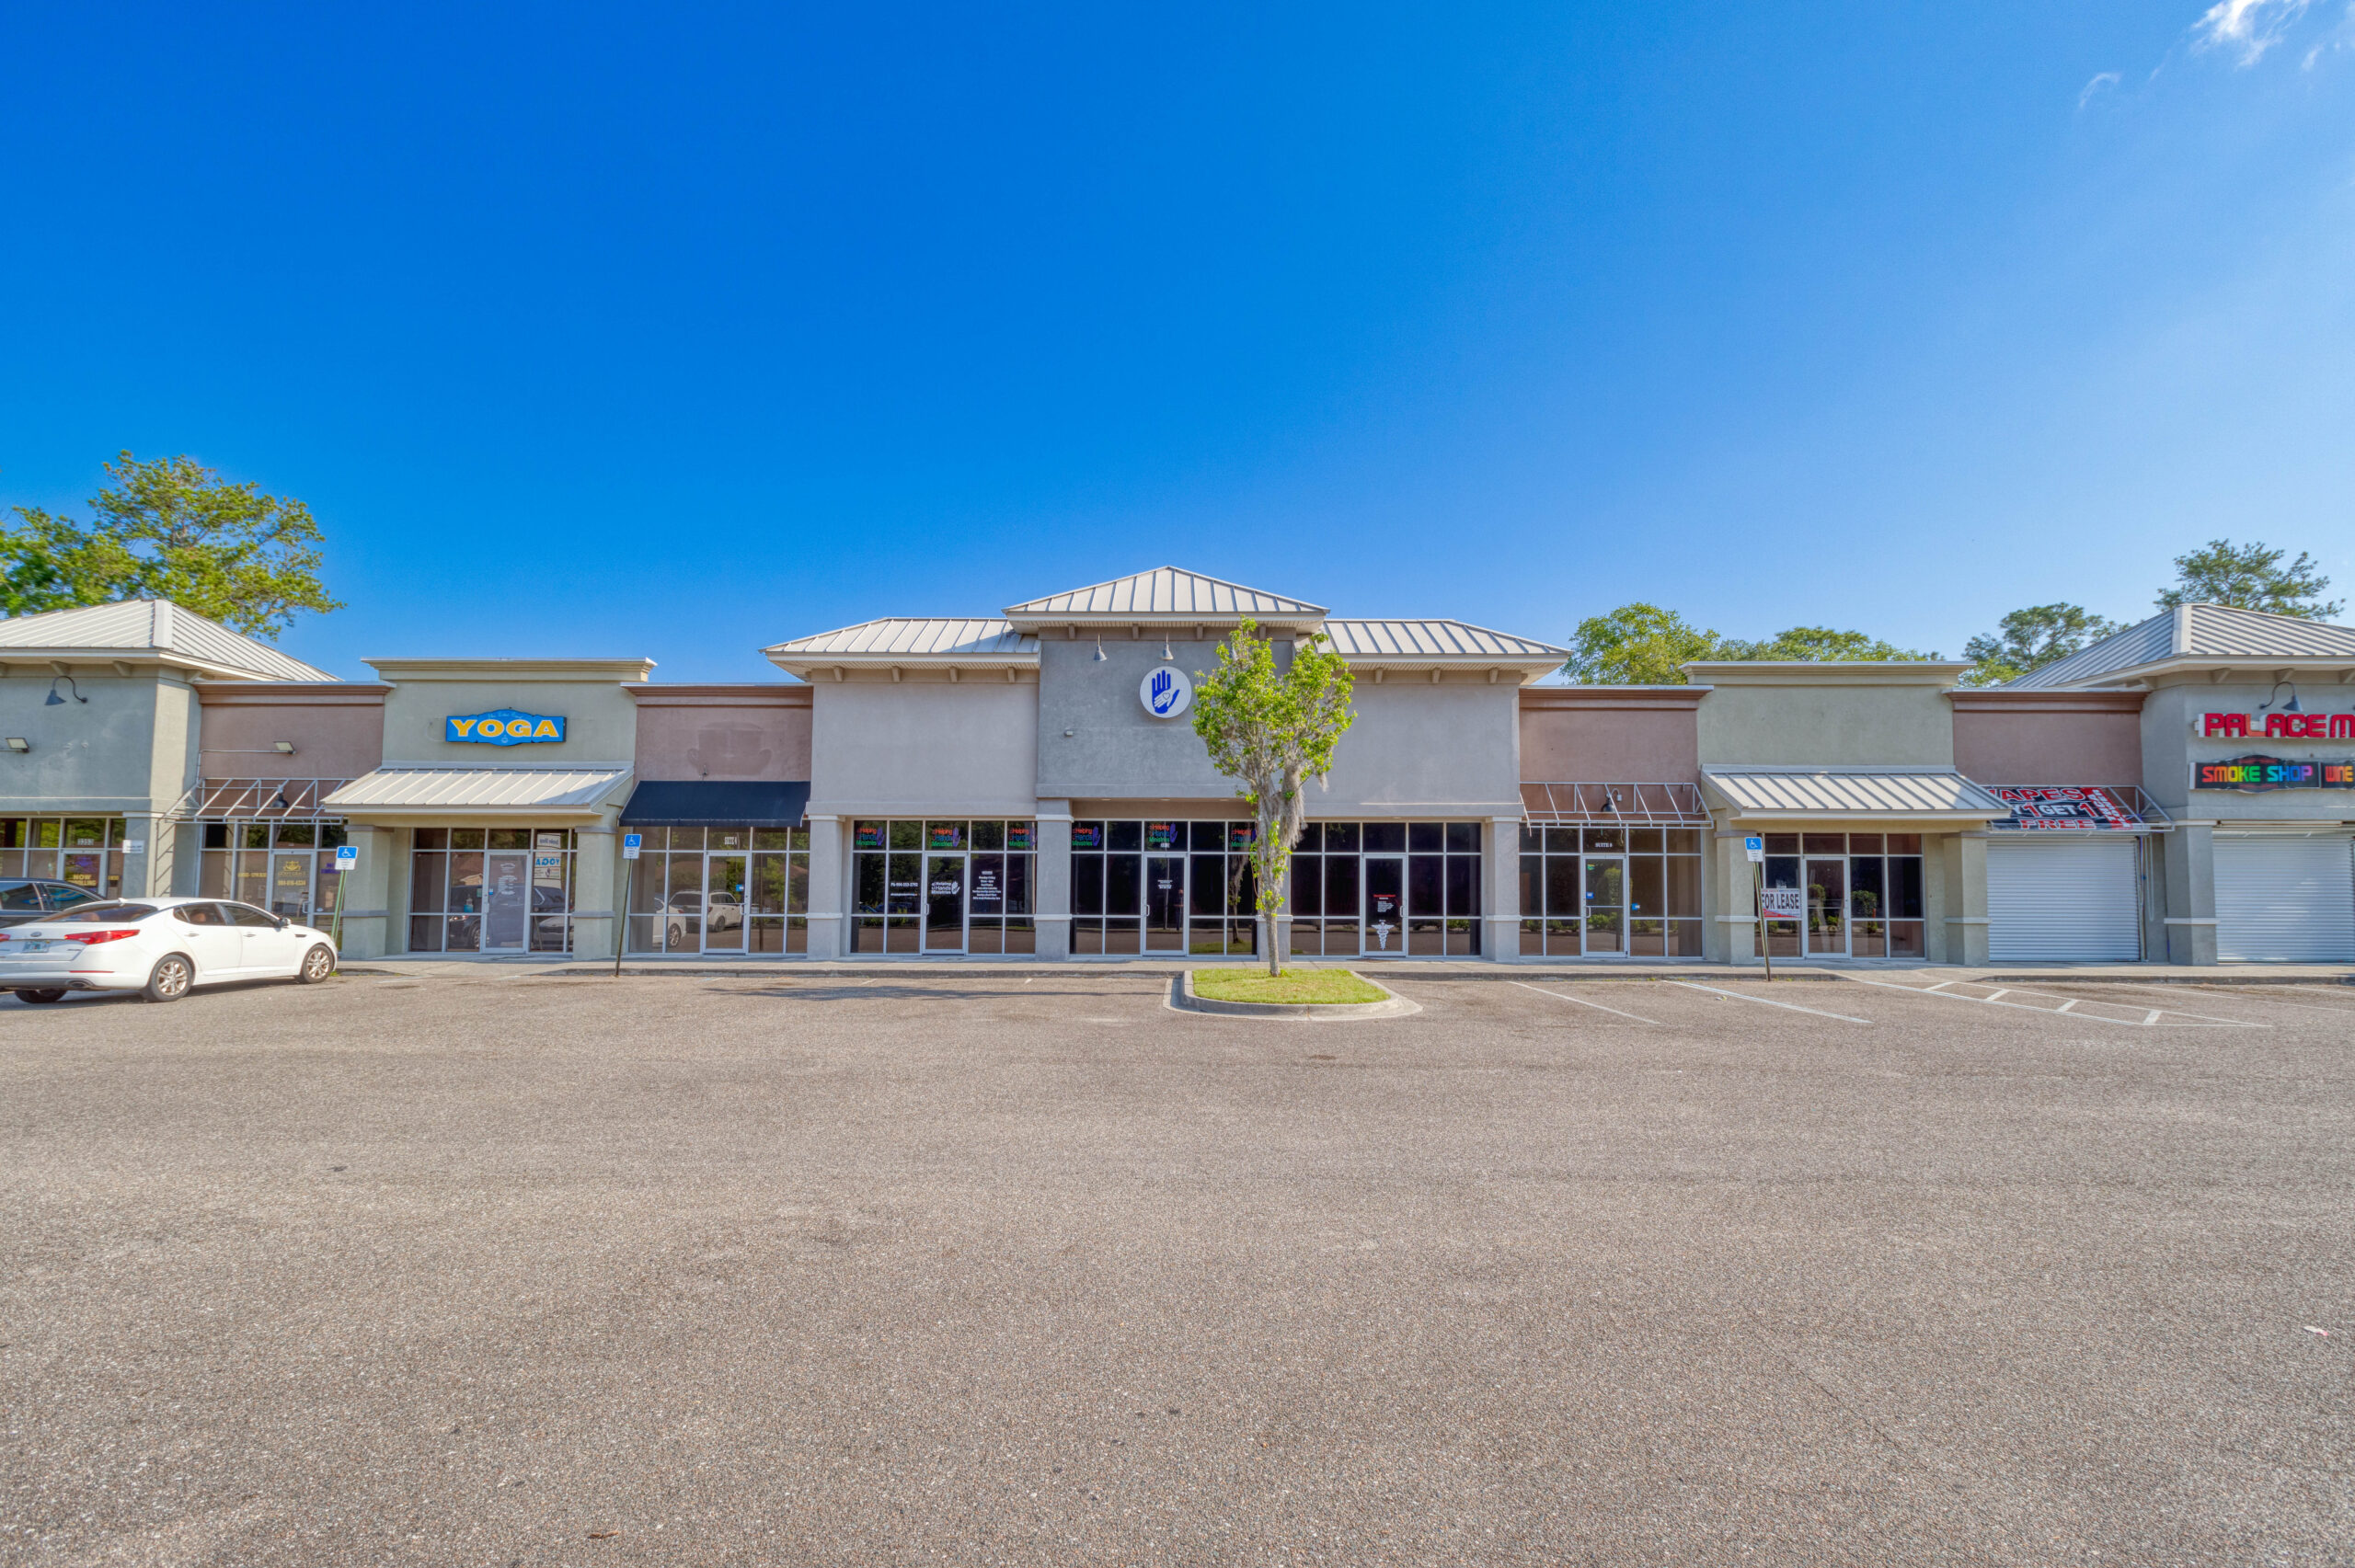 Retail Space For Lease in Jacksonville, Florida